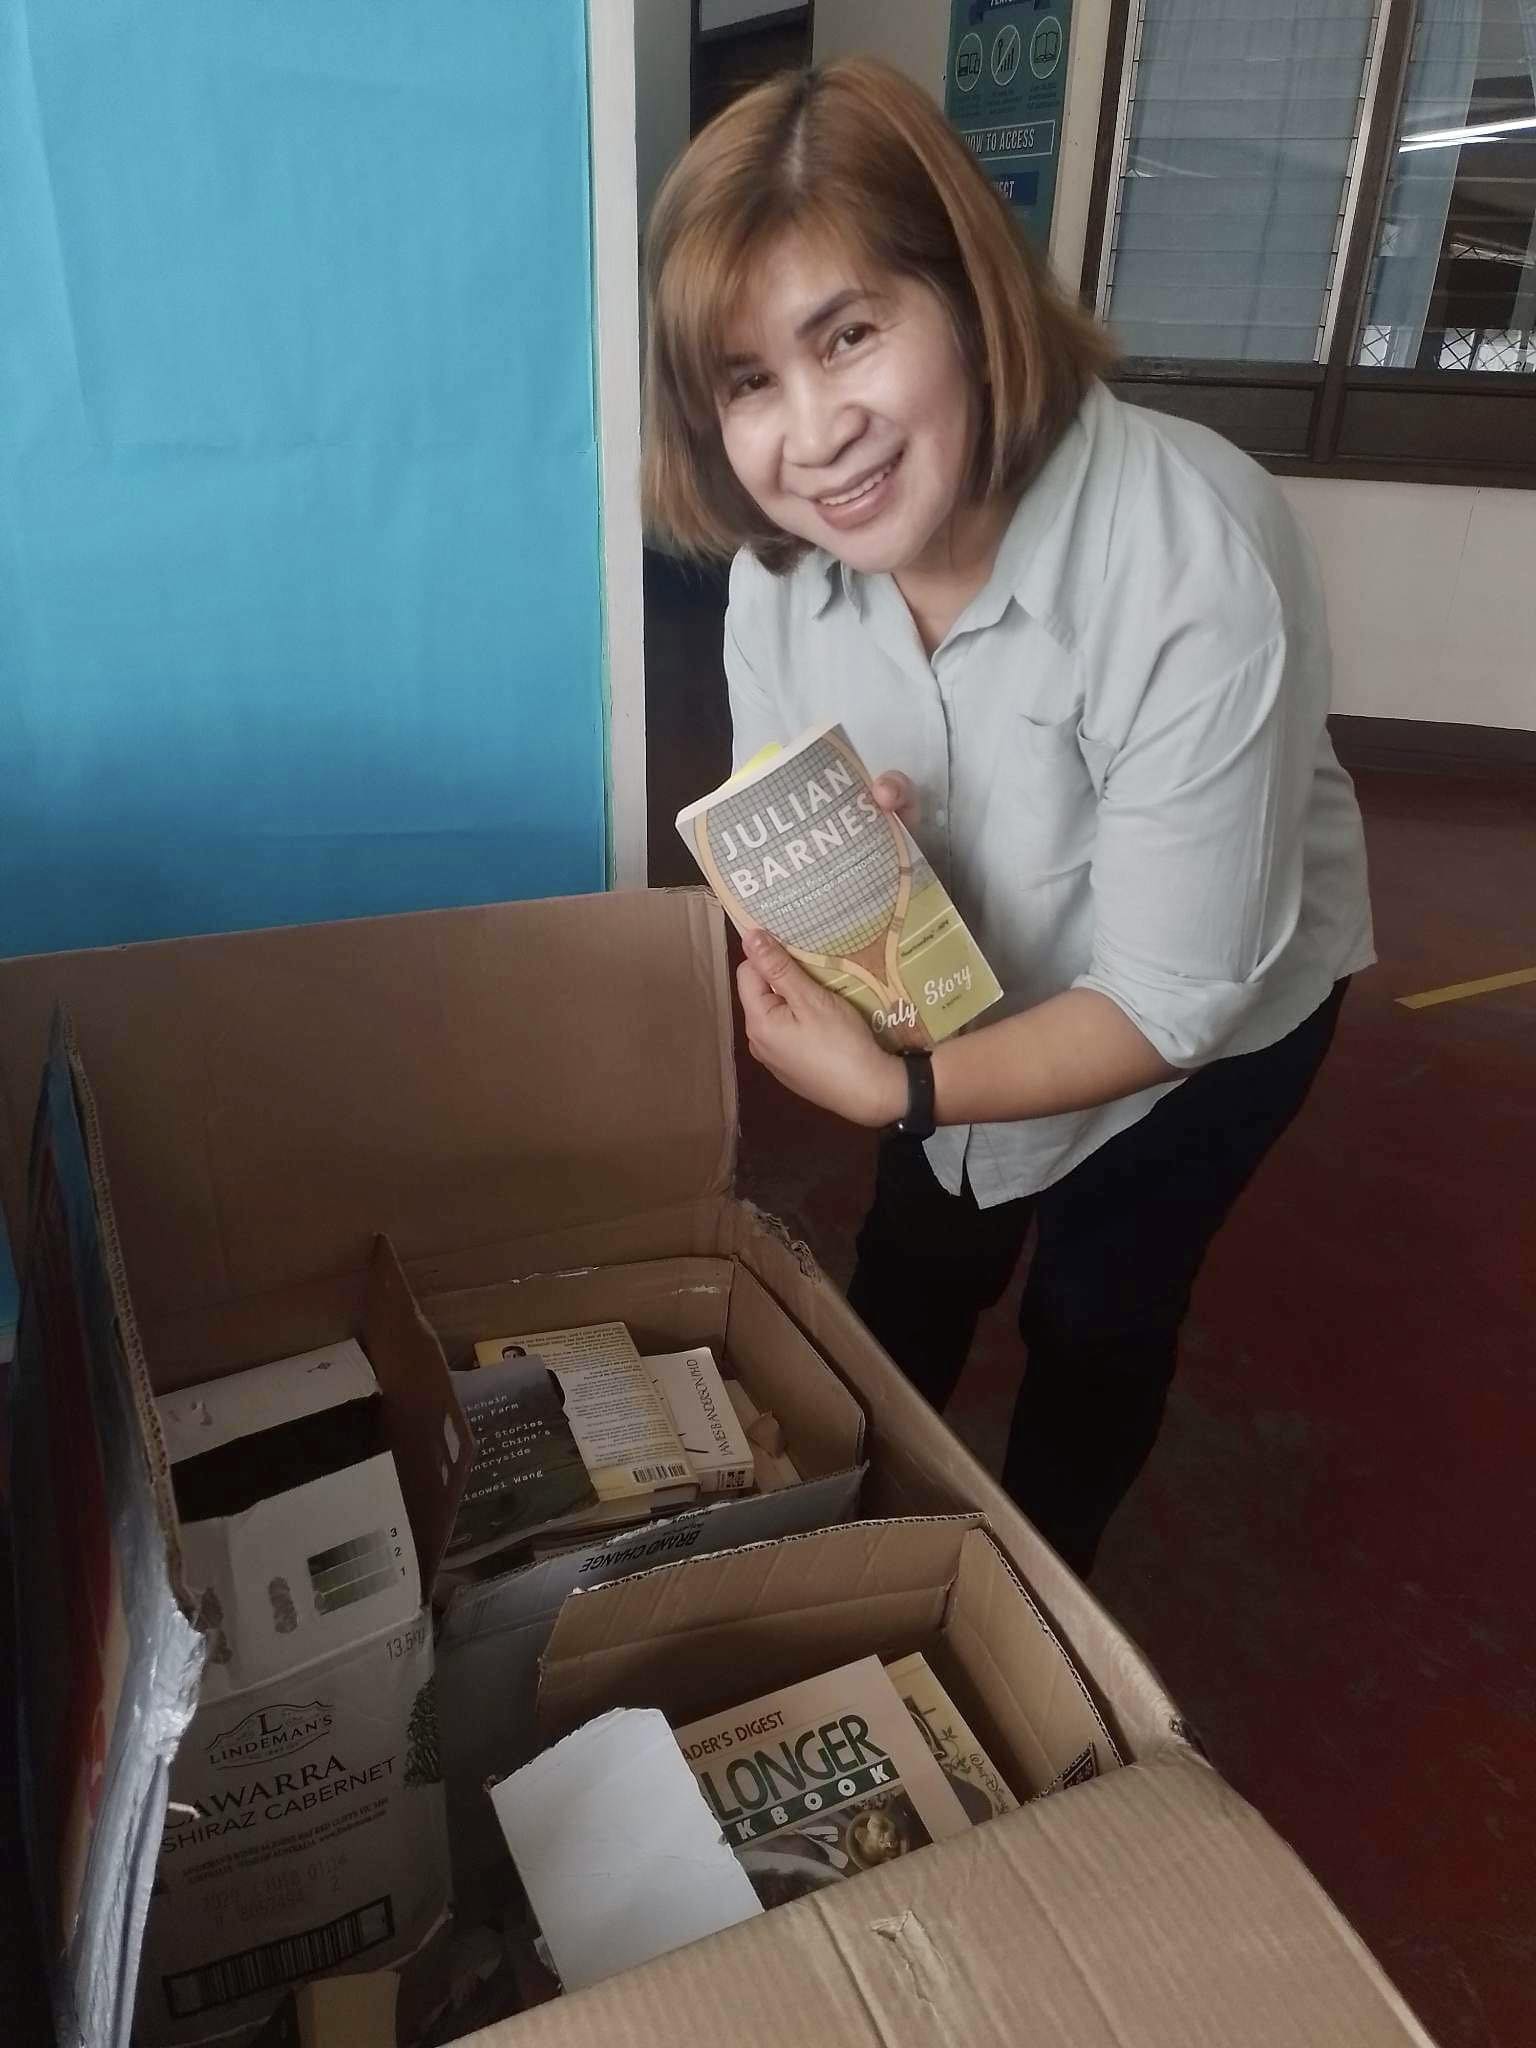 UPV University Library receives books from poet and artist alumni